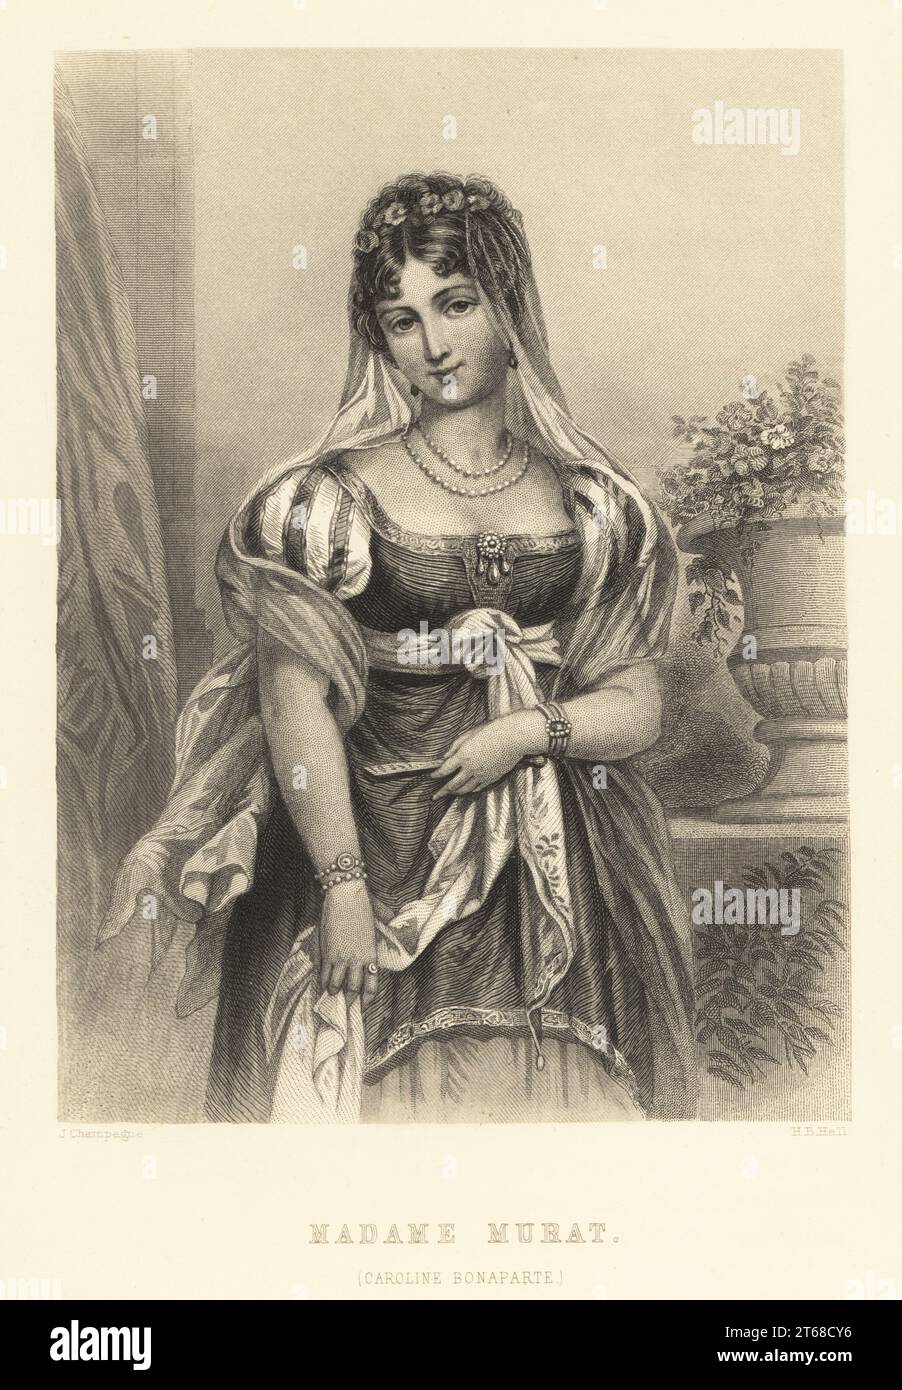 Carolina Maria Annunziata Bonaparte Murat Macdonald, 1782-1839. Caroline Bonaparte, Imperial French princess, younger sister of Emperor Napoleon I of France. In 1800, Caroline married Joachim Murat, Marshal of the Empire, Prince Murat and later King of Naples. Steel engraving by H.B. Hall after a portrait by Jules Champagne from Frank B. Goodrichs The Court of Napoleon or Society under the First Empire, J. B. Lippincott, Philadelphia, 1875. Stock Photo